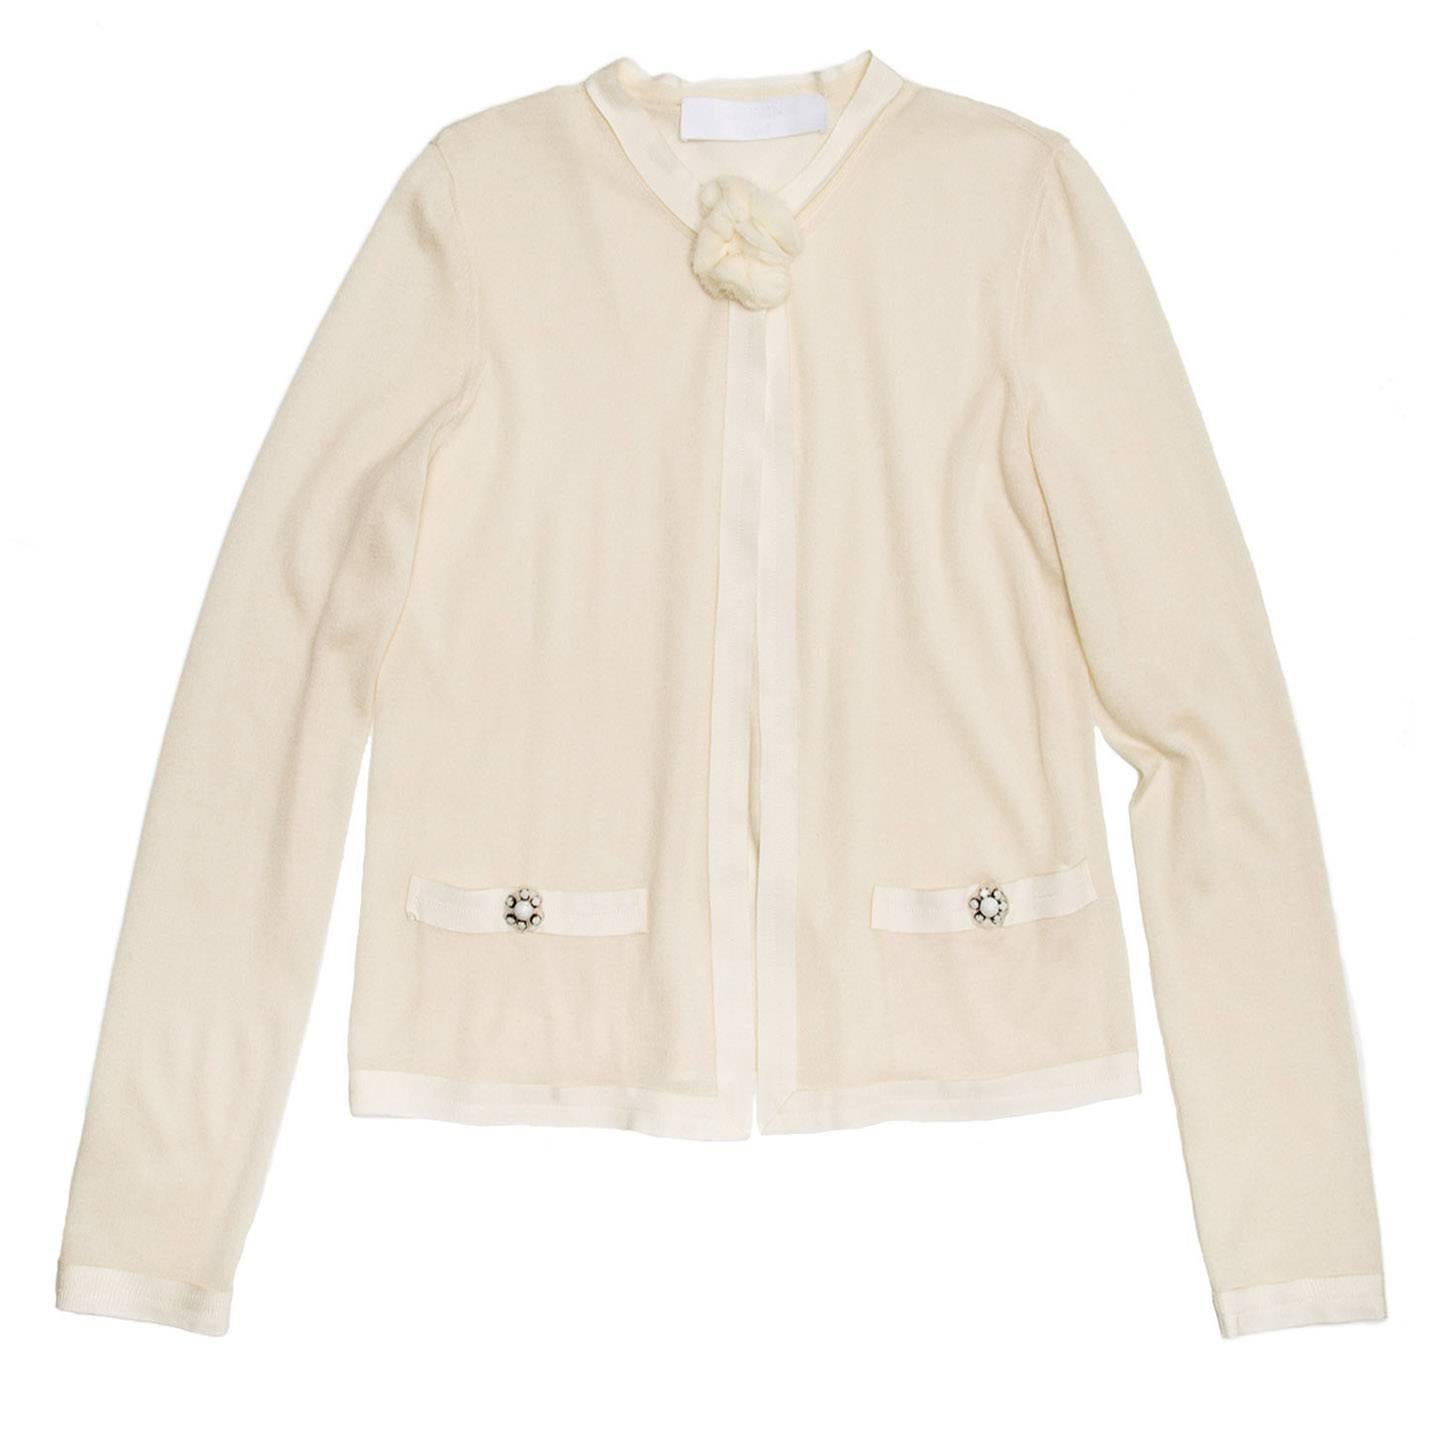 Ete 2008 cashmere and silk bland ivory cardigan with grosgrain profiles and pockets top edge. The front fastens with a chiffon flower button at neck only and jewel white rhinestone flower buttons embellish the pockets.

Size  XL Universal